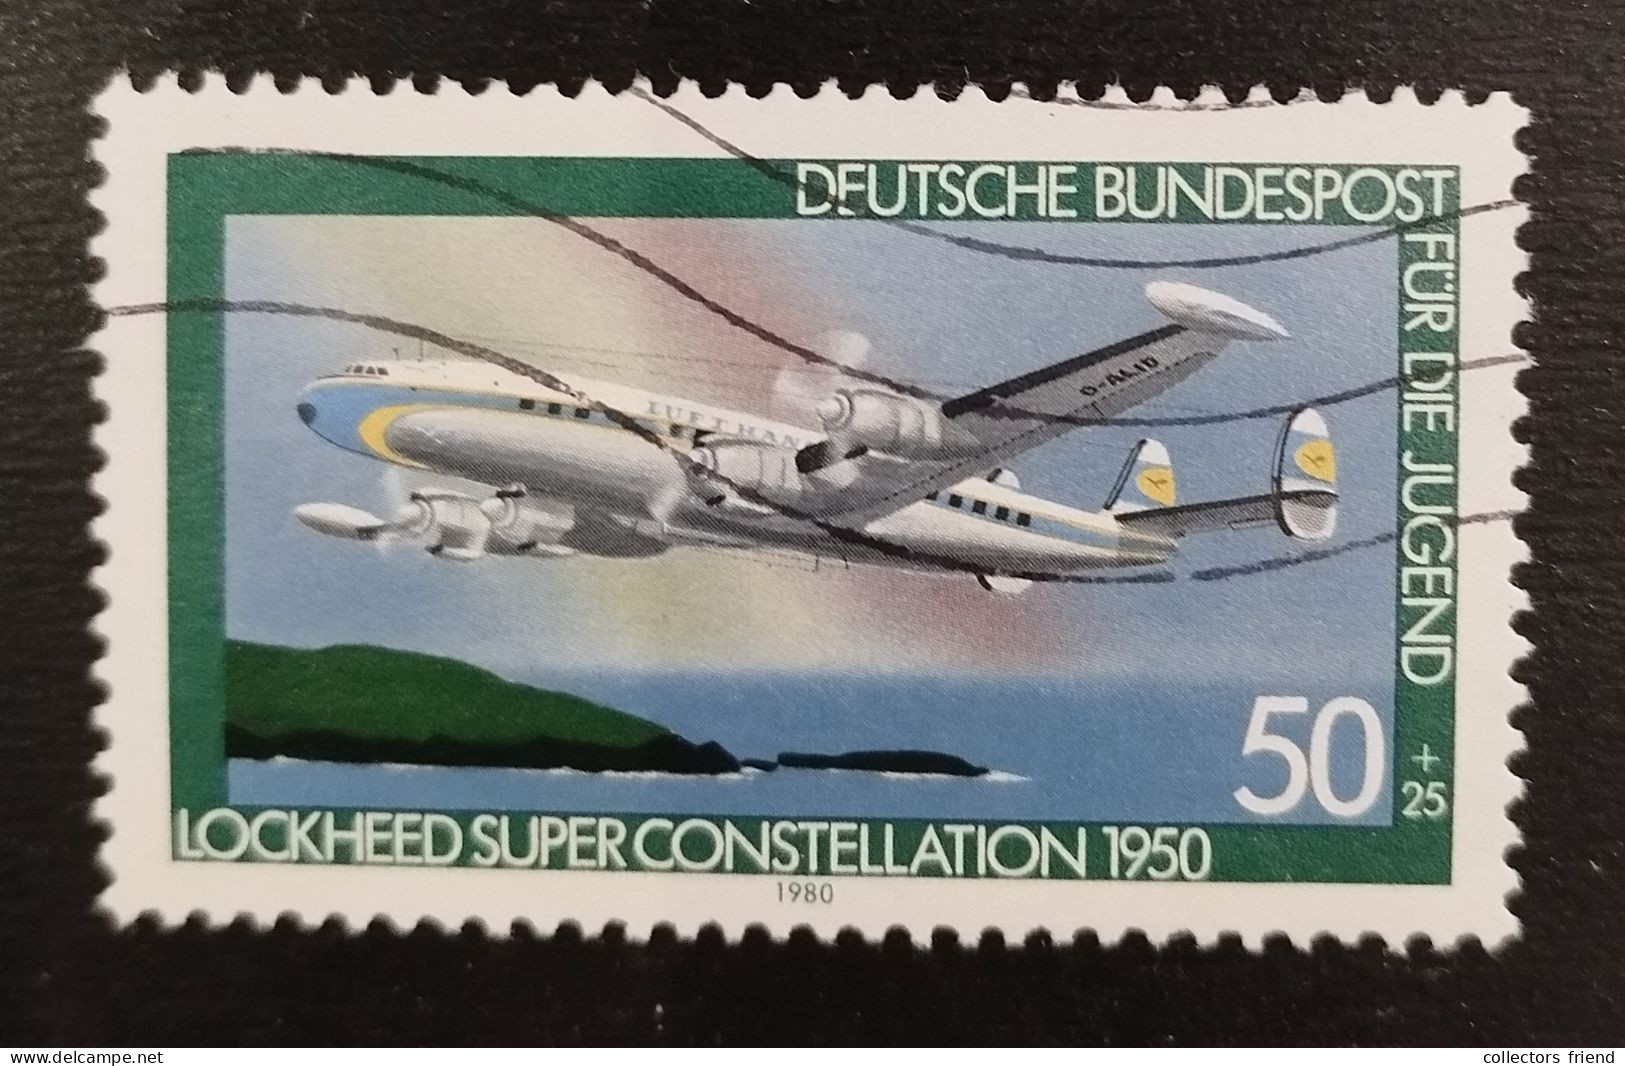 Germany - 1980 - Flugzeuge, Aviation, Airplanes - Mi. 1041 - Used - Airplanes